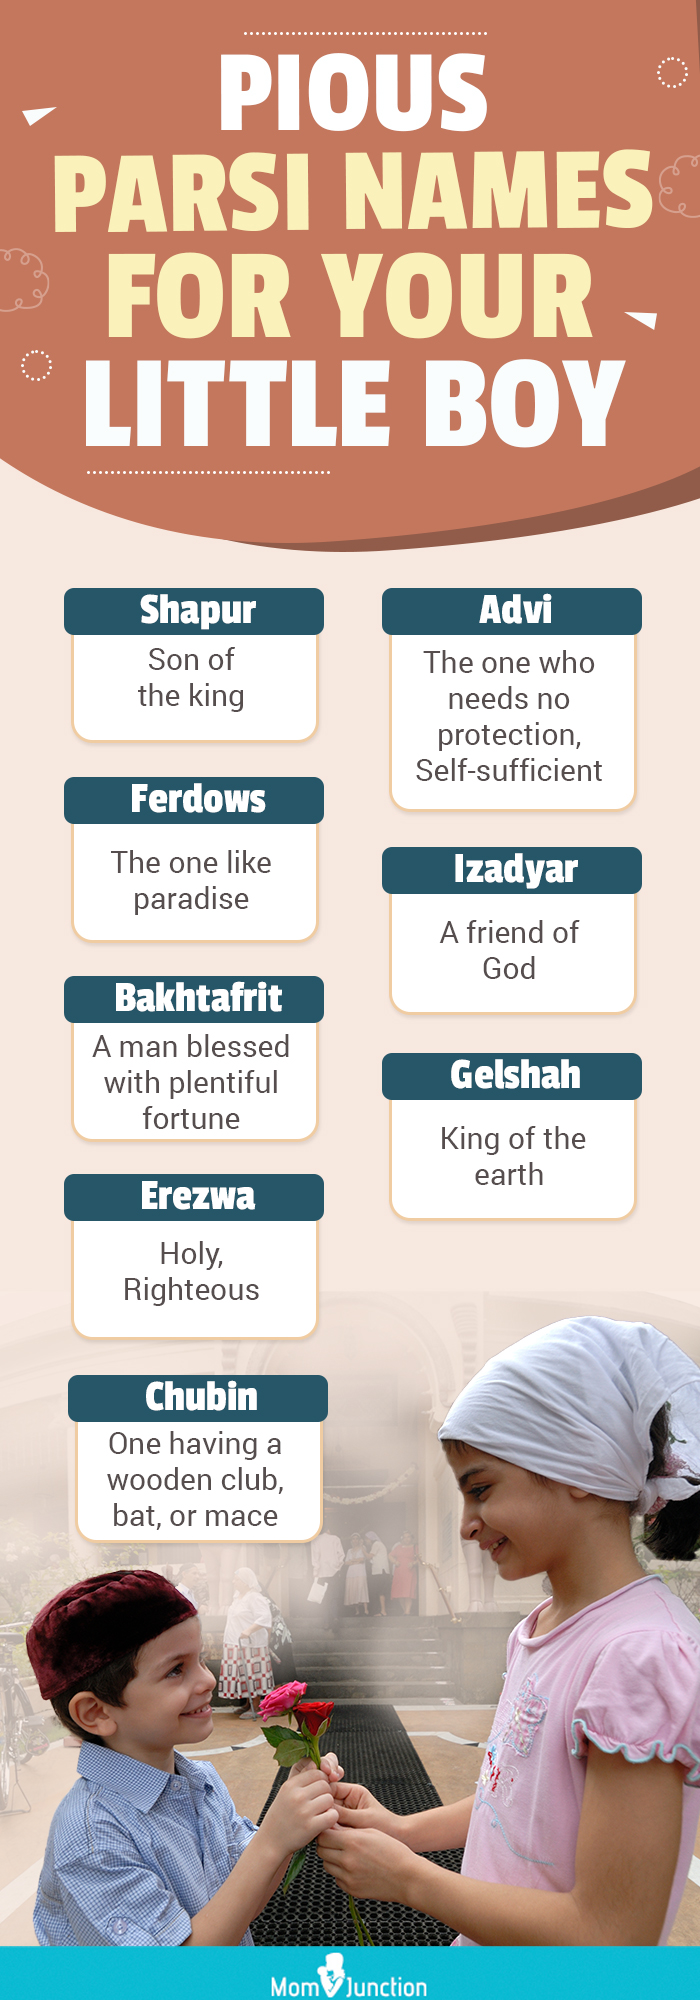 Pious Parsi Names For Your Little Boy (infographic)